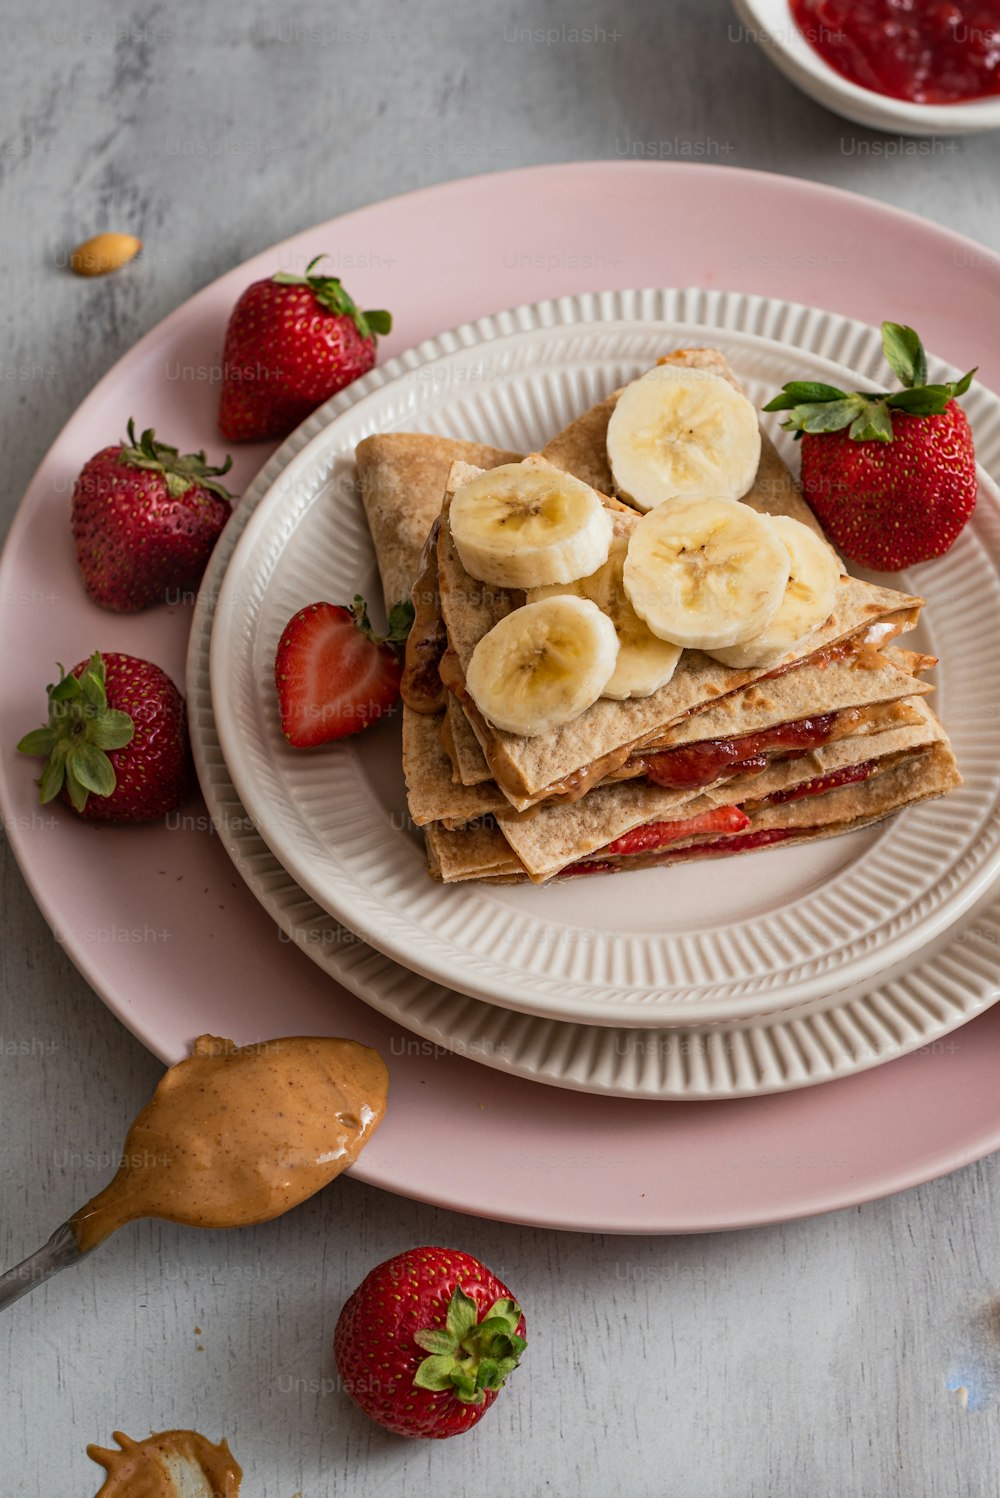 a plate of food with bananas and strawberries on it